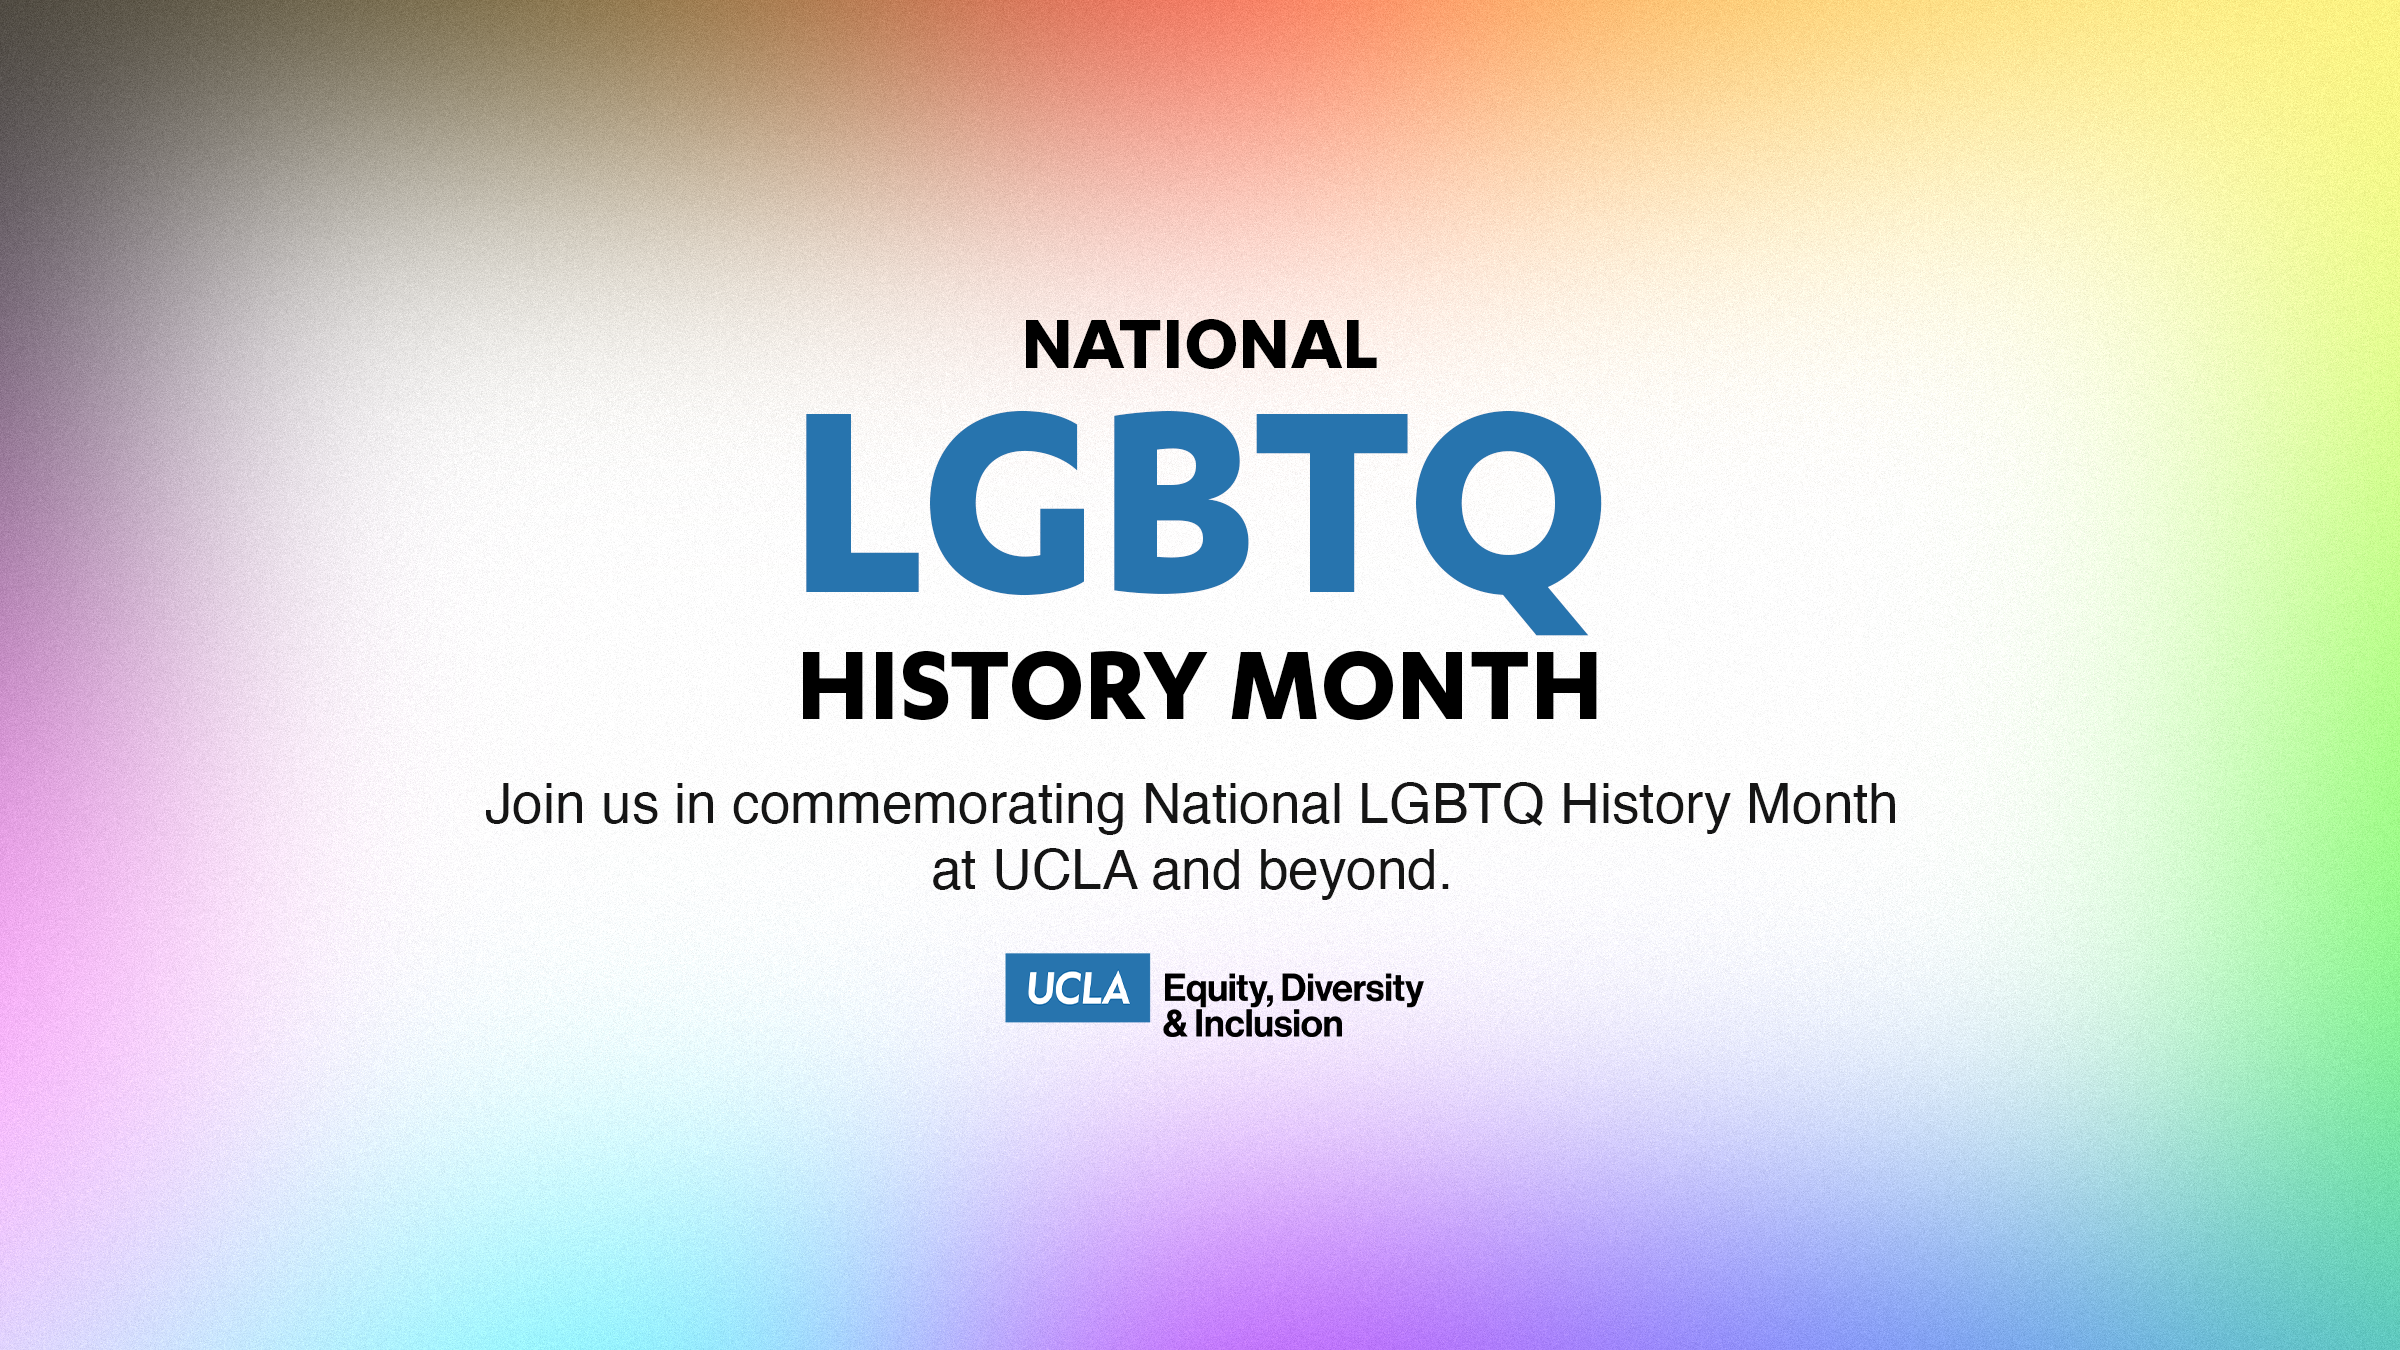 lgbtq history month (october 2022) - join us in commemorating lgbtq history month at ucla and beyond